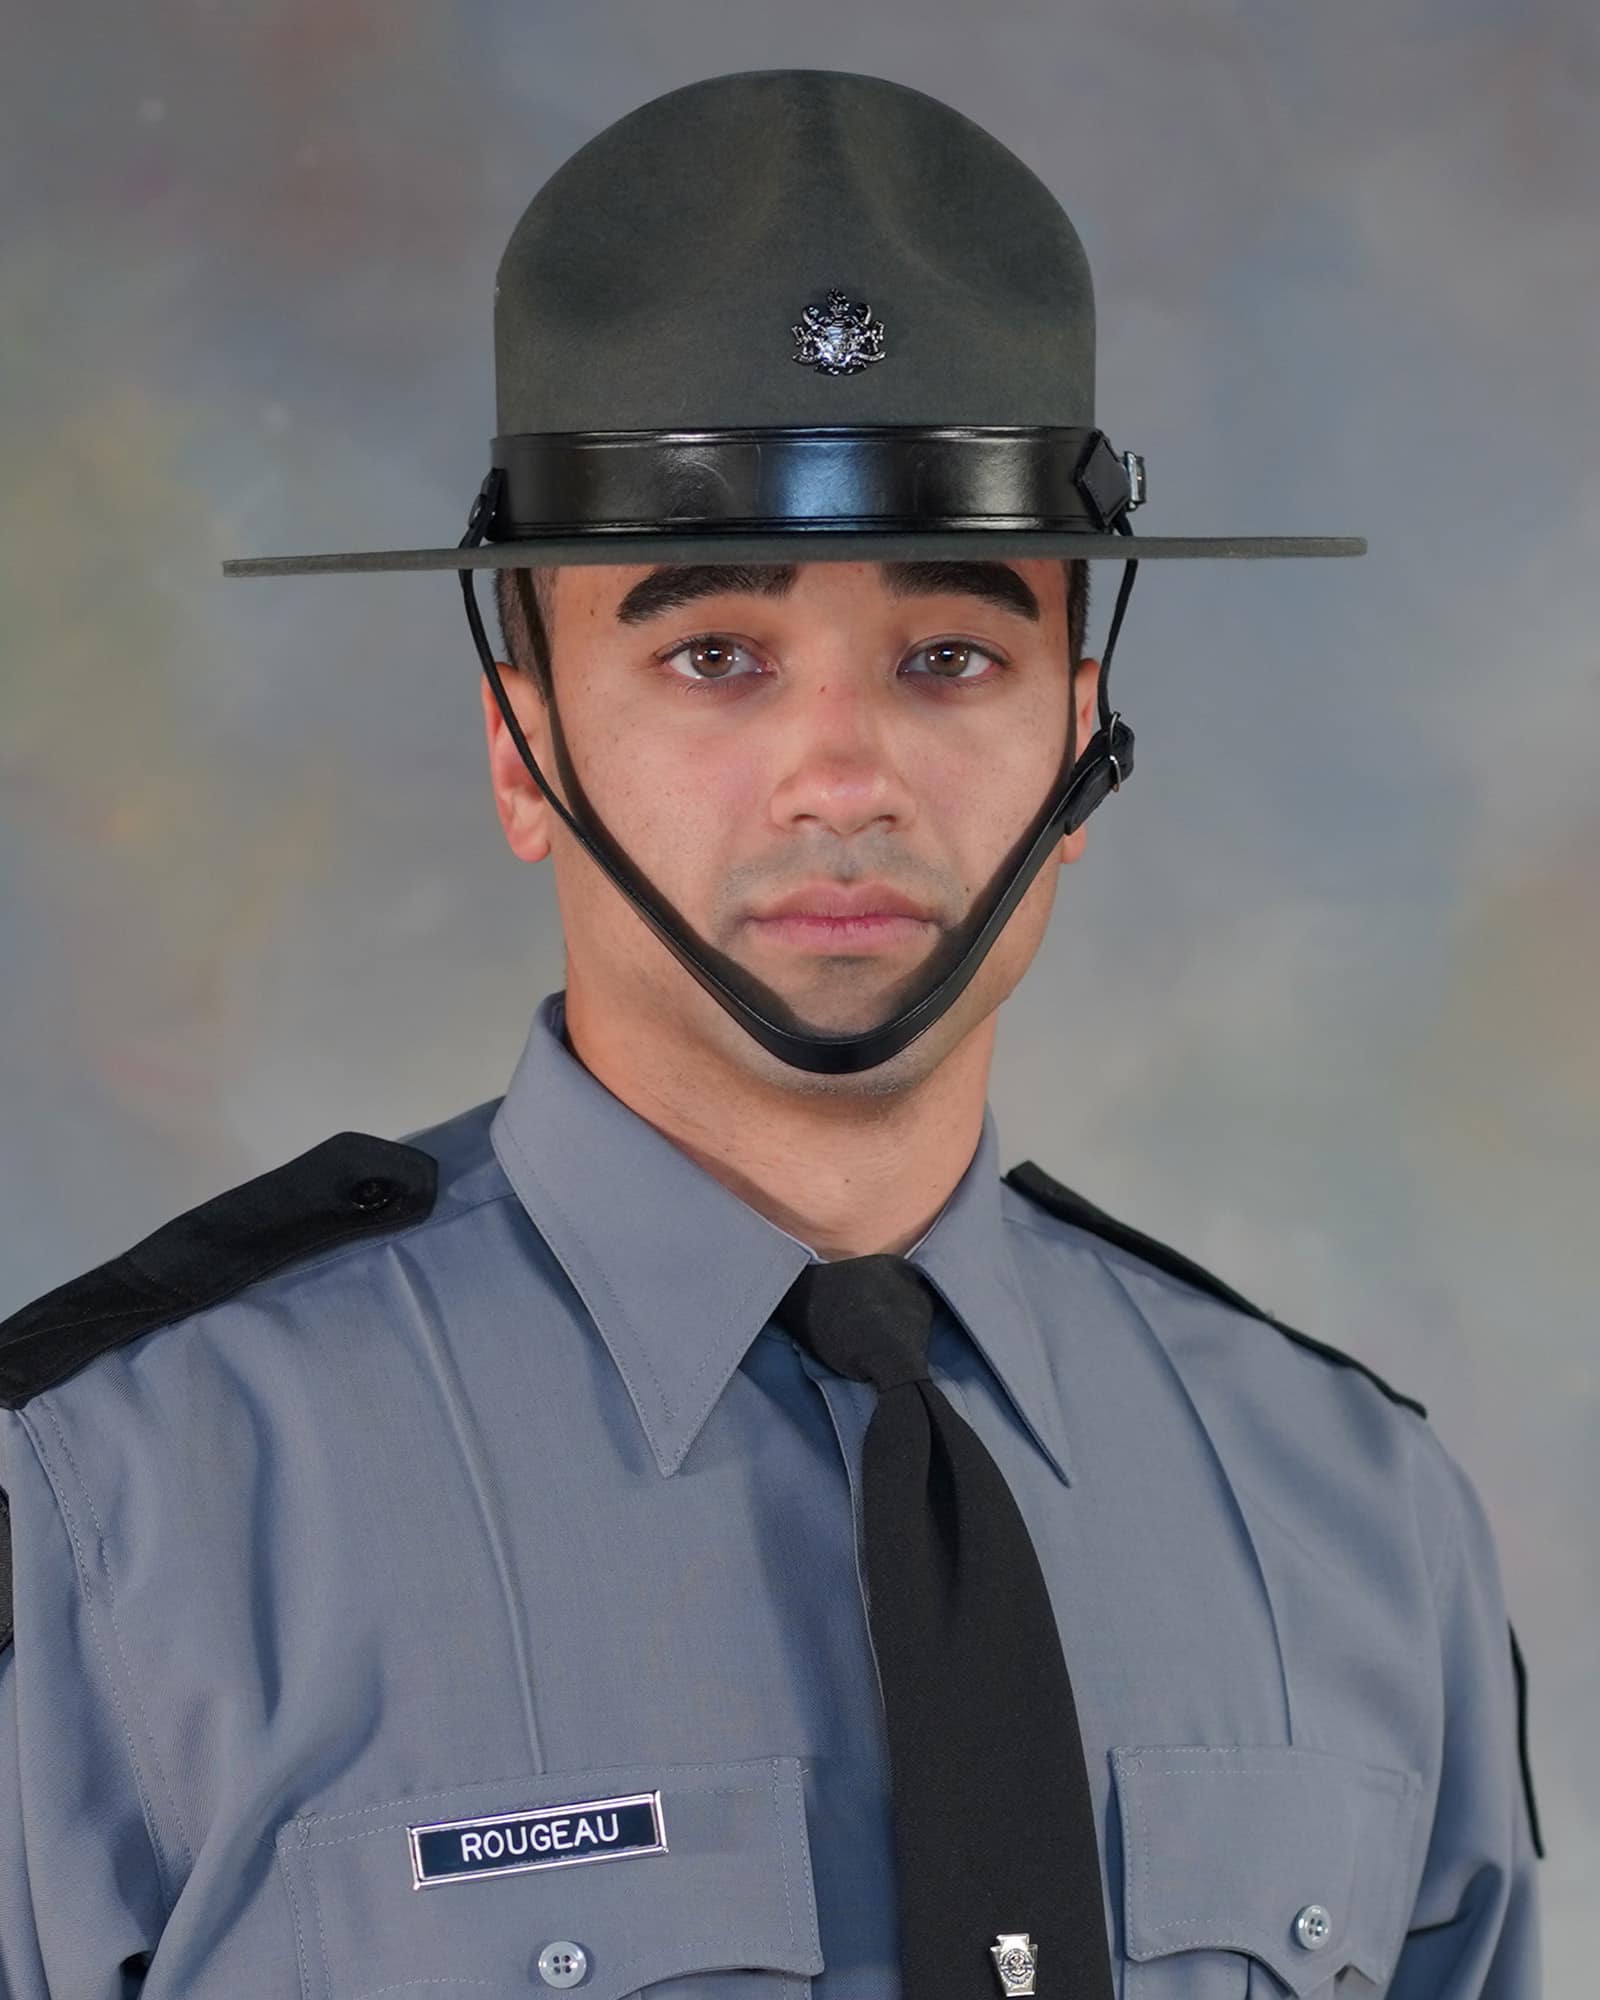 Trooper Jacques F. Rougeau, Jr. | Pennsylvania State Police, Pennsylvania